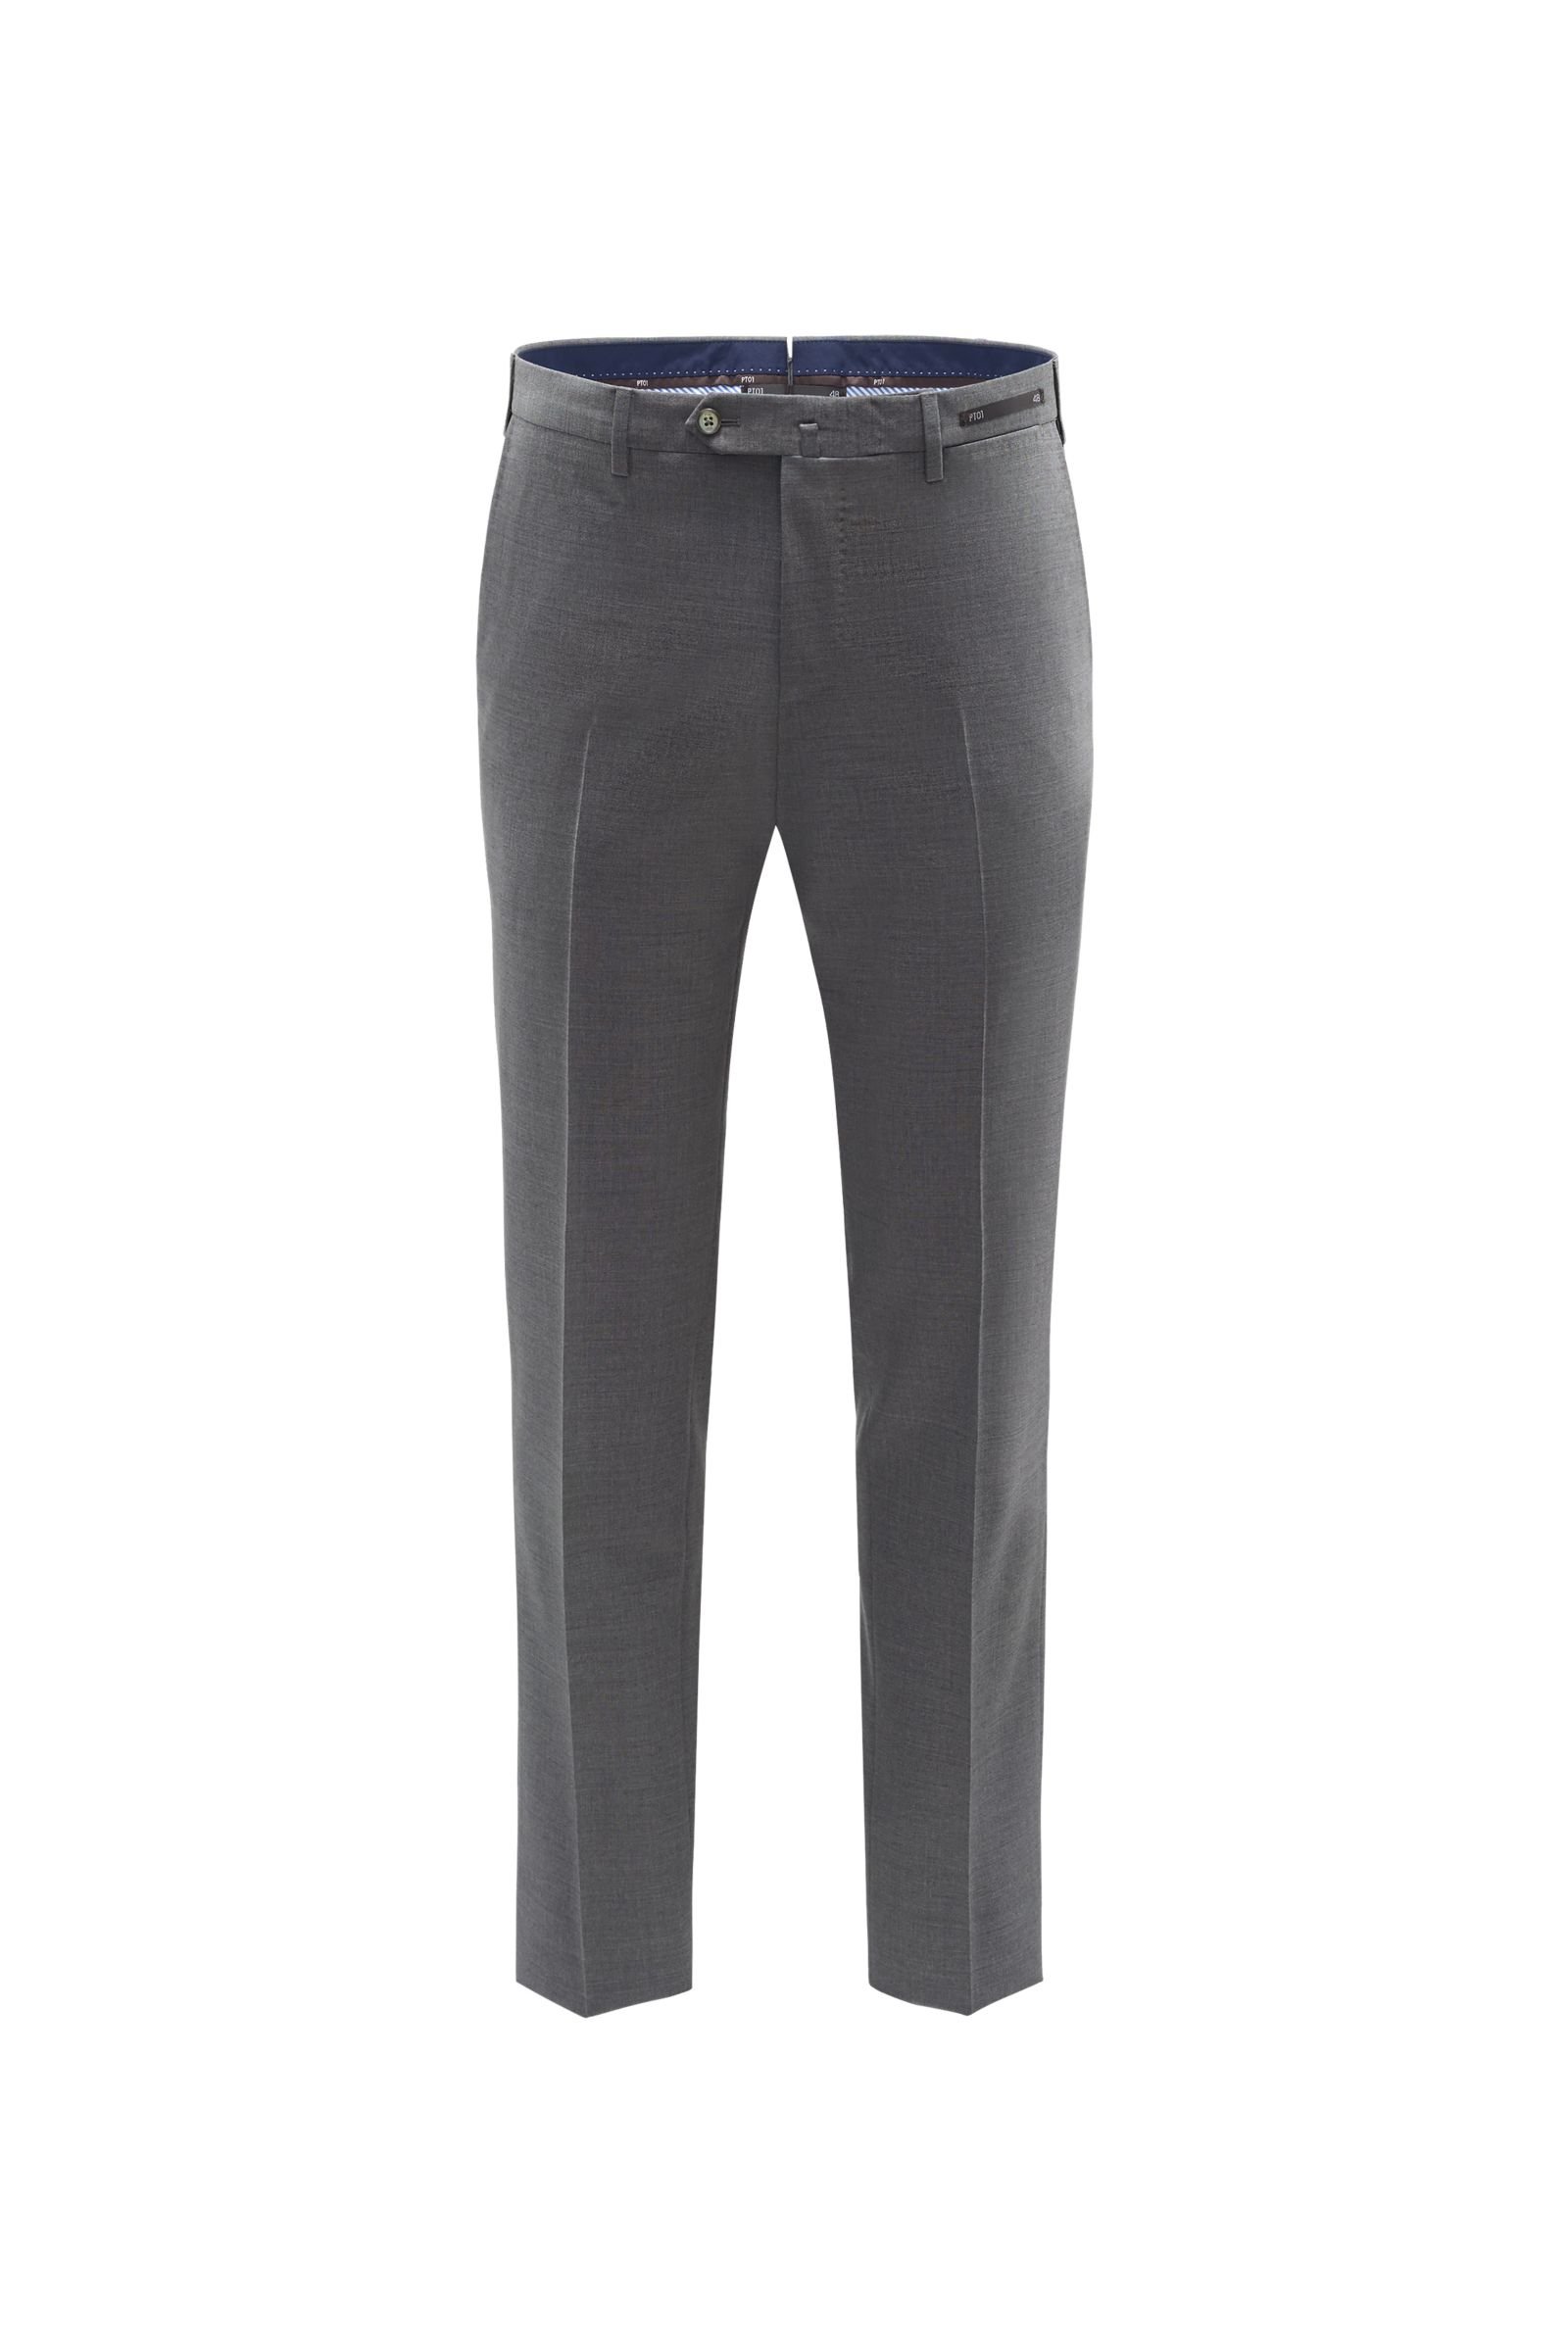 Cotton trousers grey